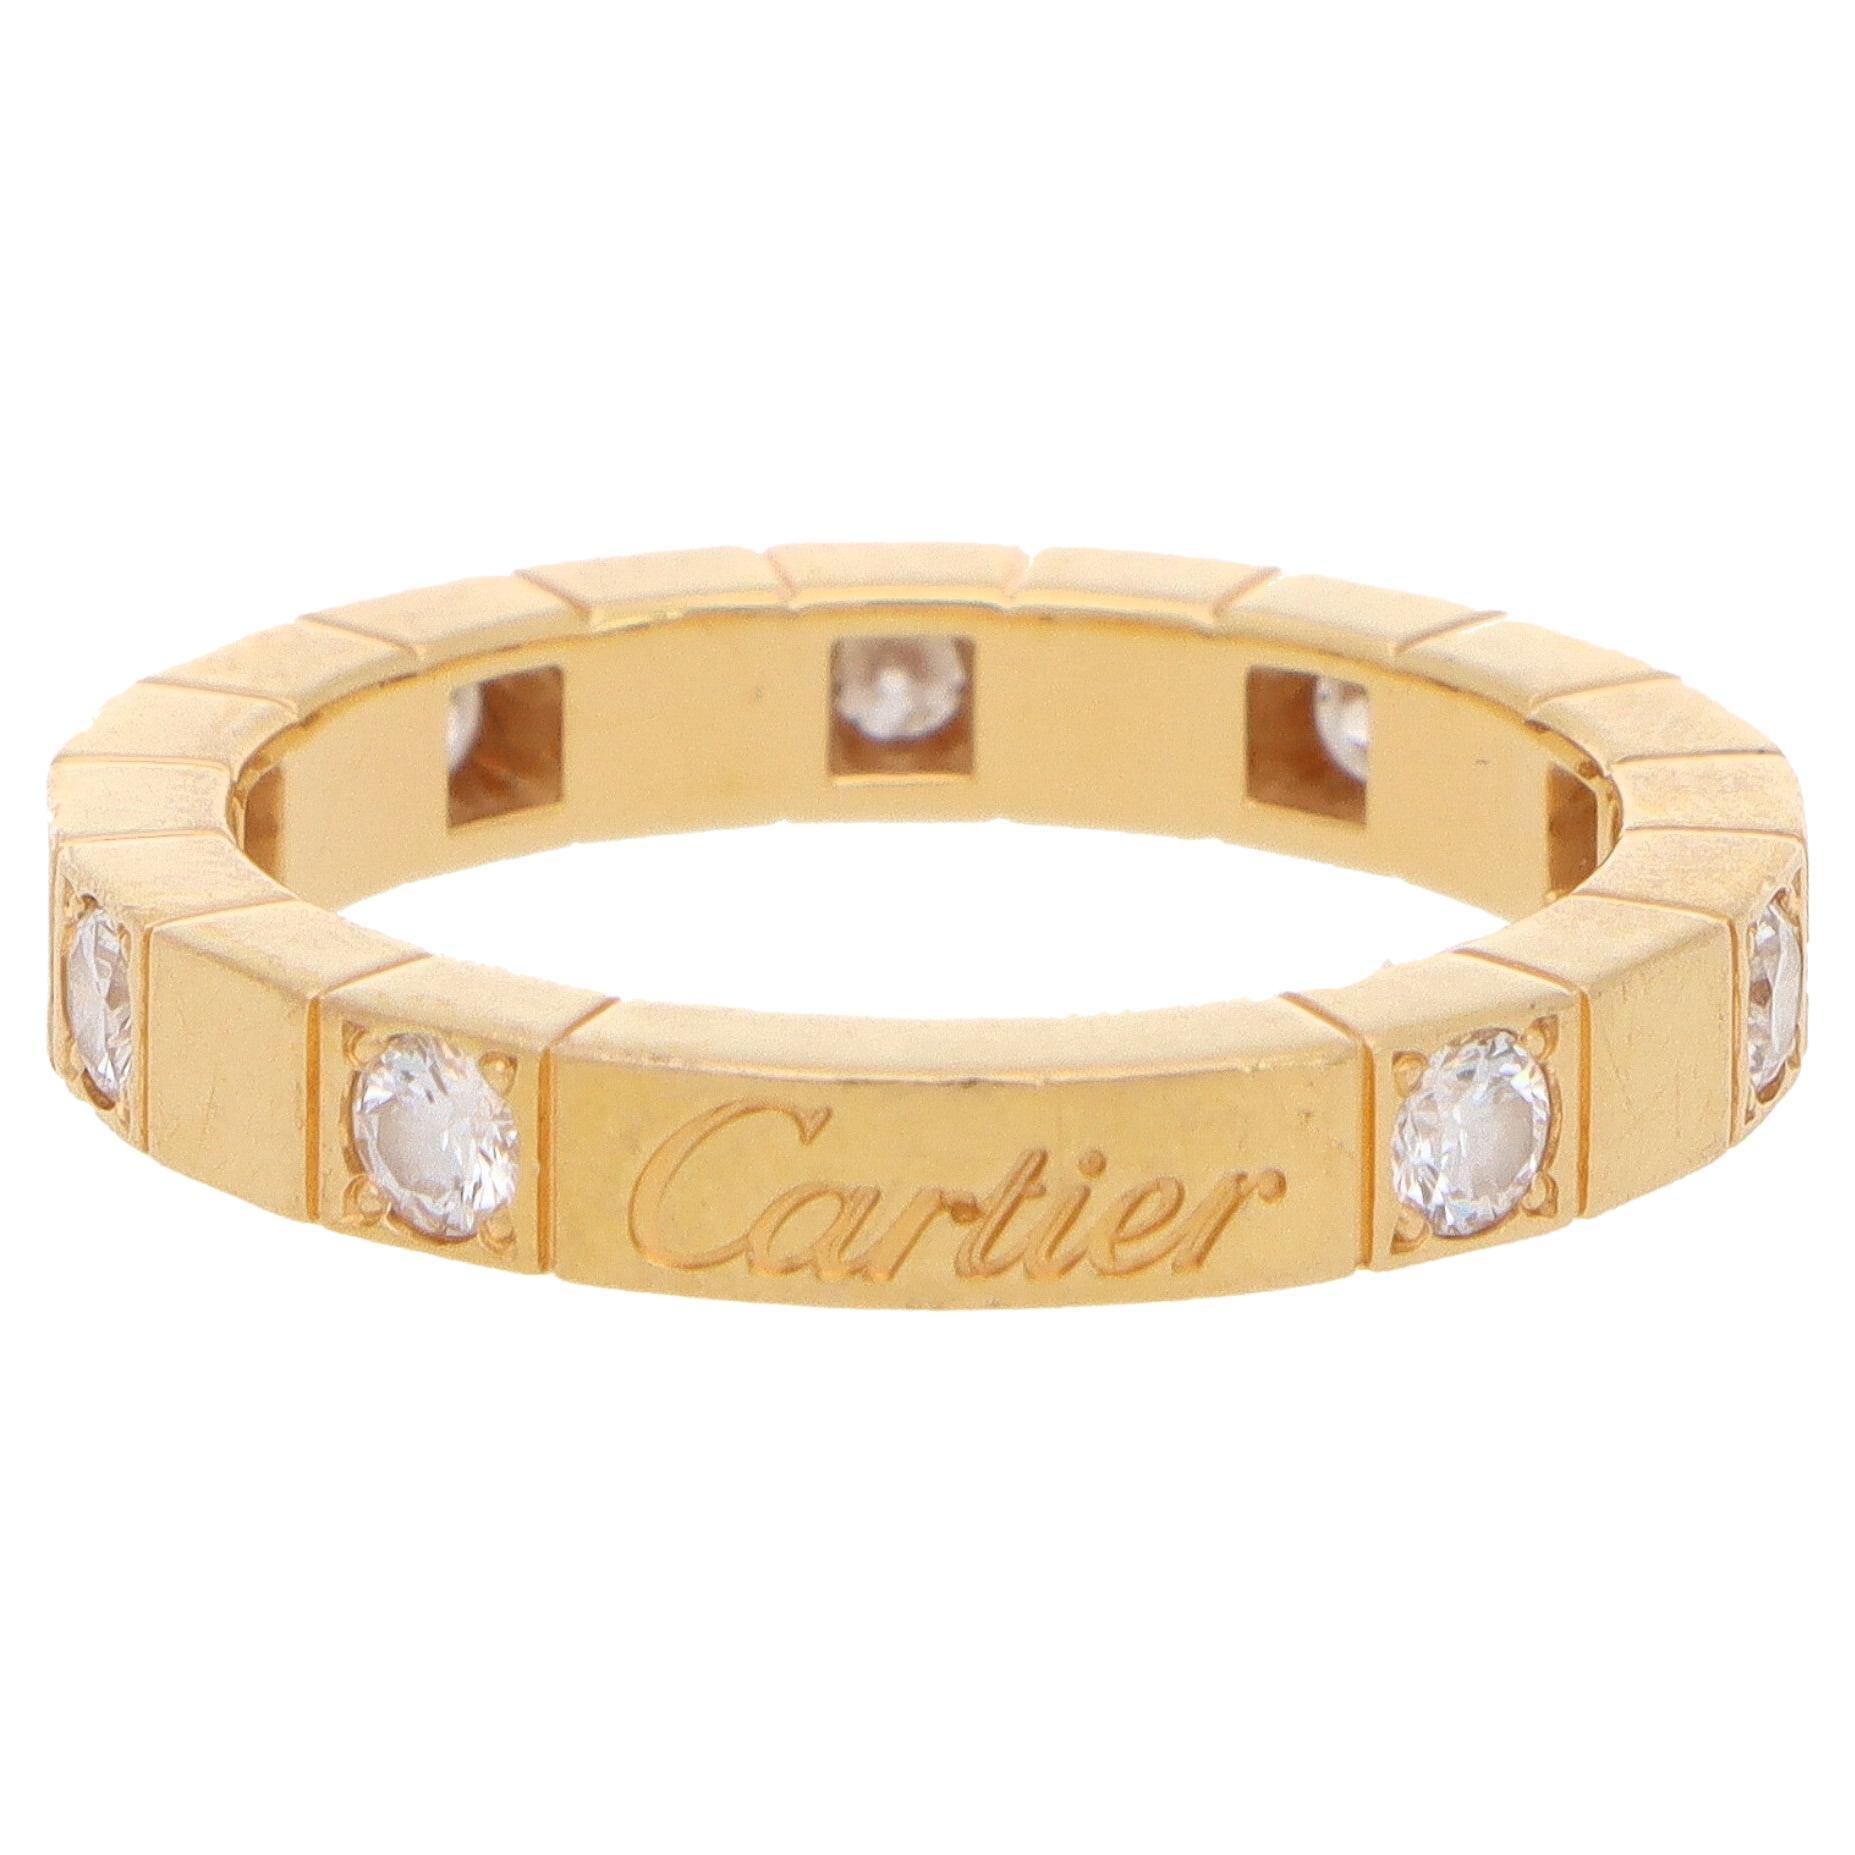 Vintage Cartier Lanières Diamond Eternity Band Ring Set in 18k Yellow Gold